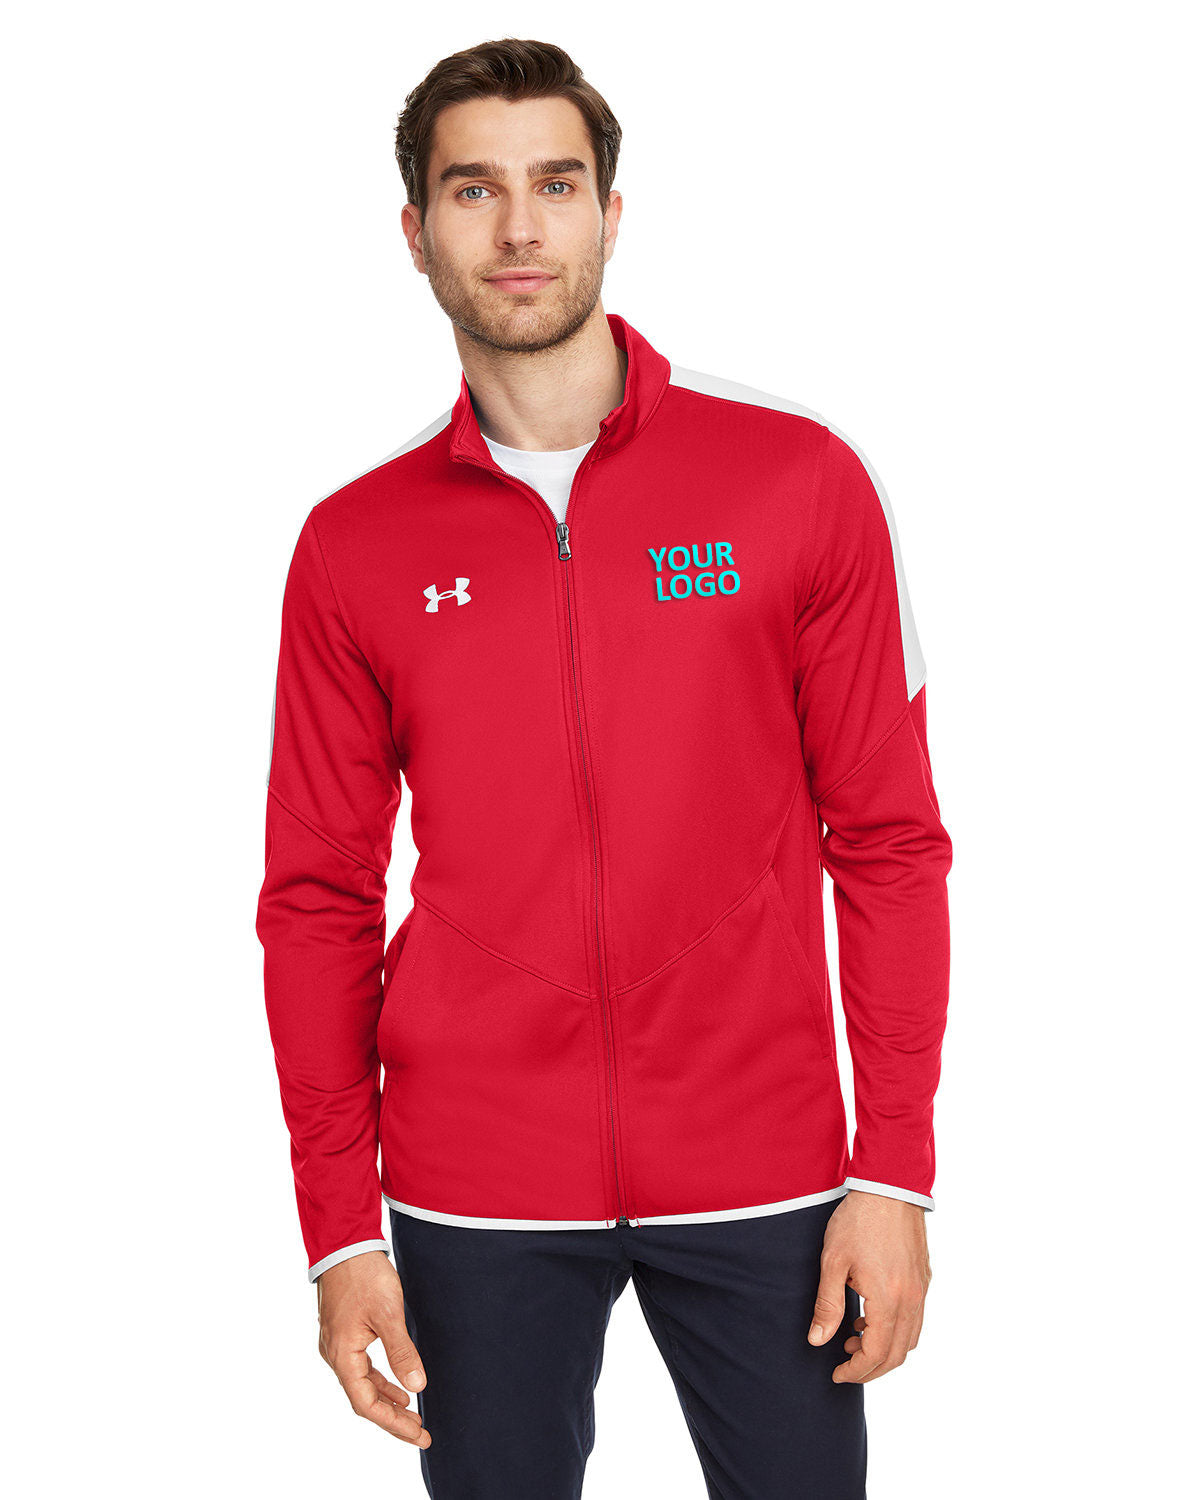 jackets with company logo Under Armour RED 600 1326761